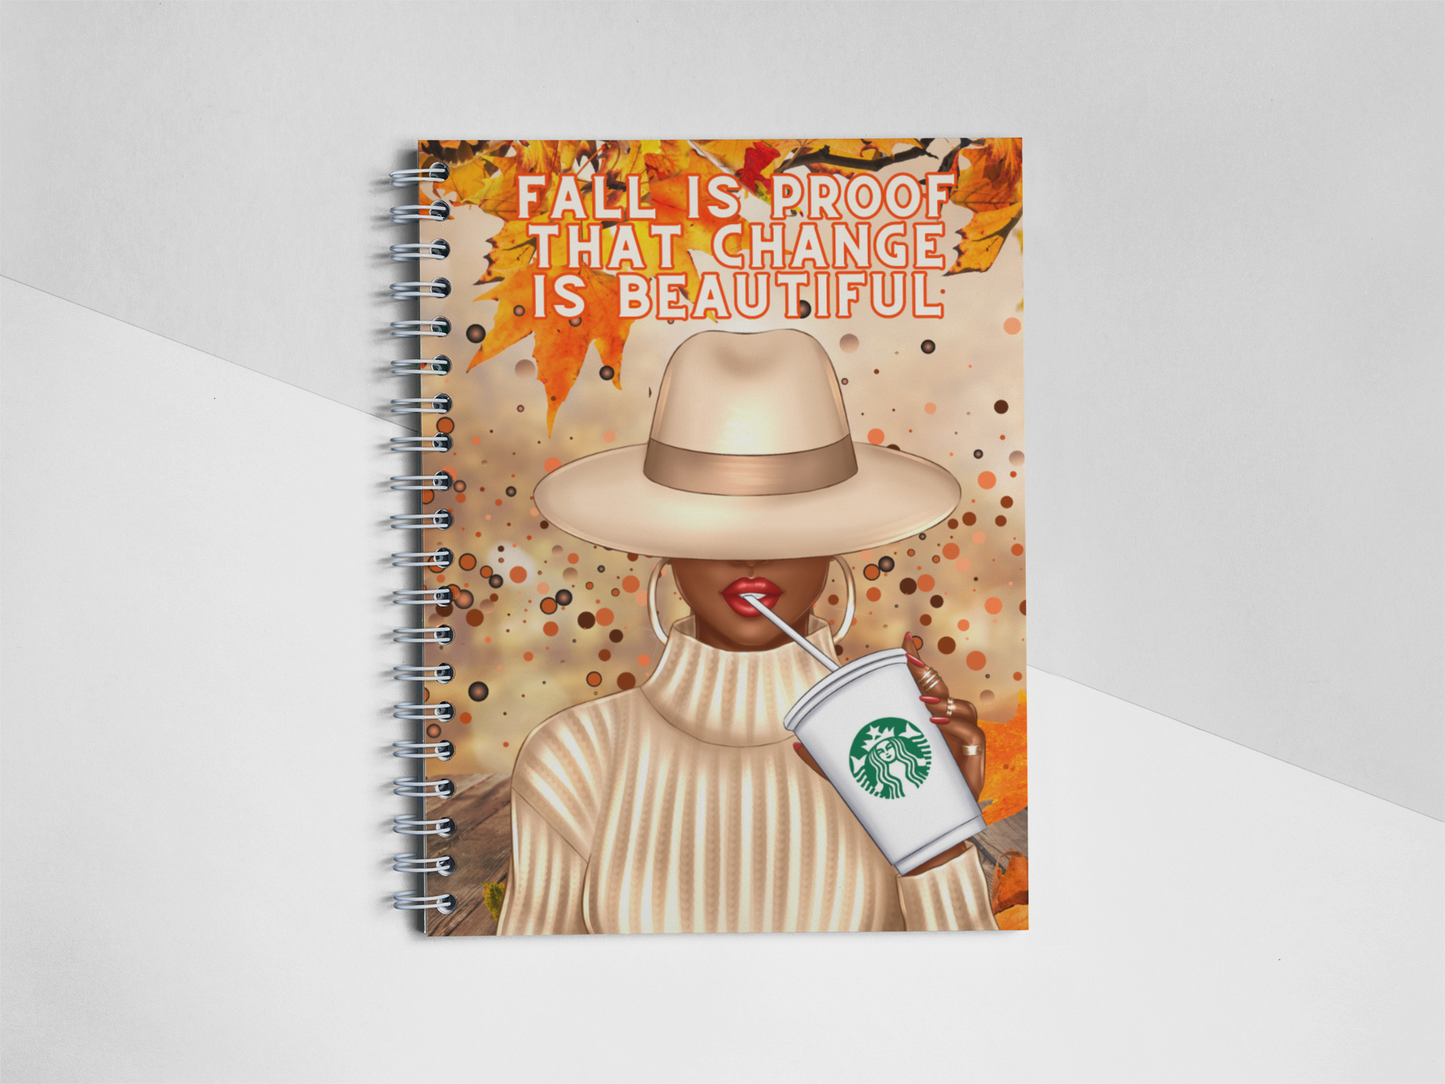 "Fall is Proof" * PNG Printable Download*Image may be used for journals, notebooks, tumblers, mugs (resizing will be required)